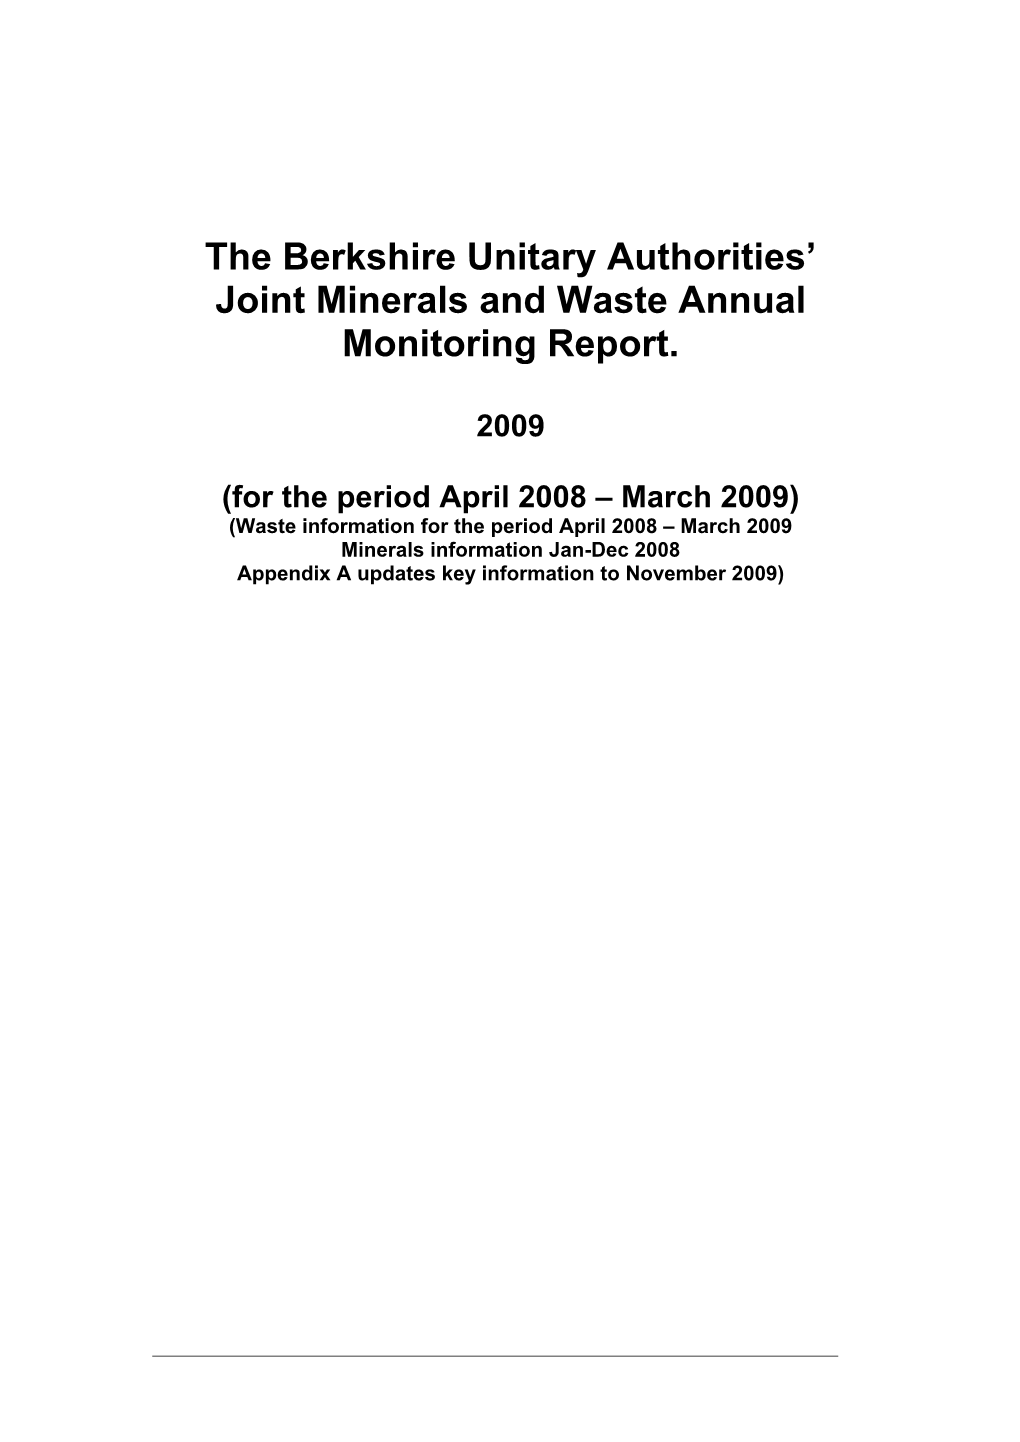 The Berkshire Unitary Authorities' Joint Minerals and Waste Annual